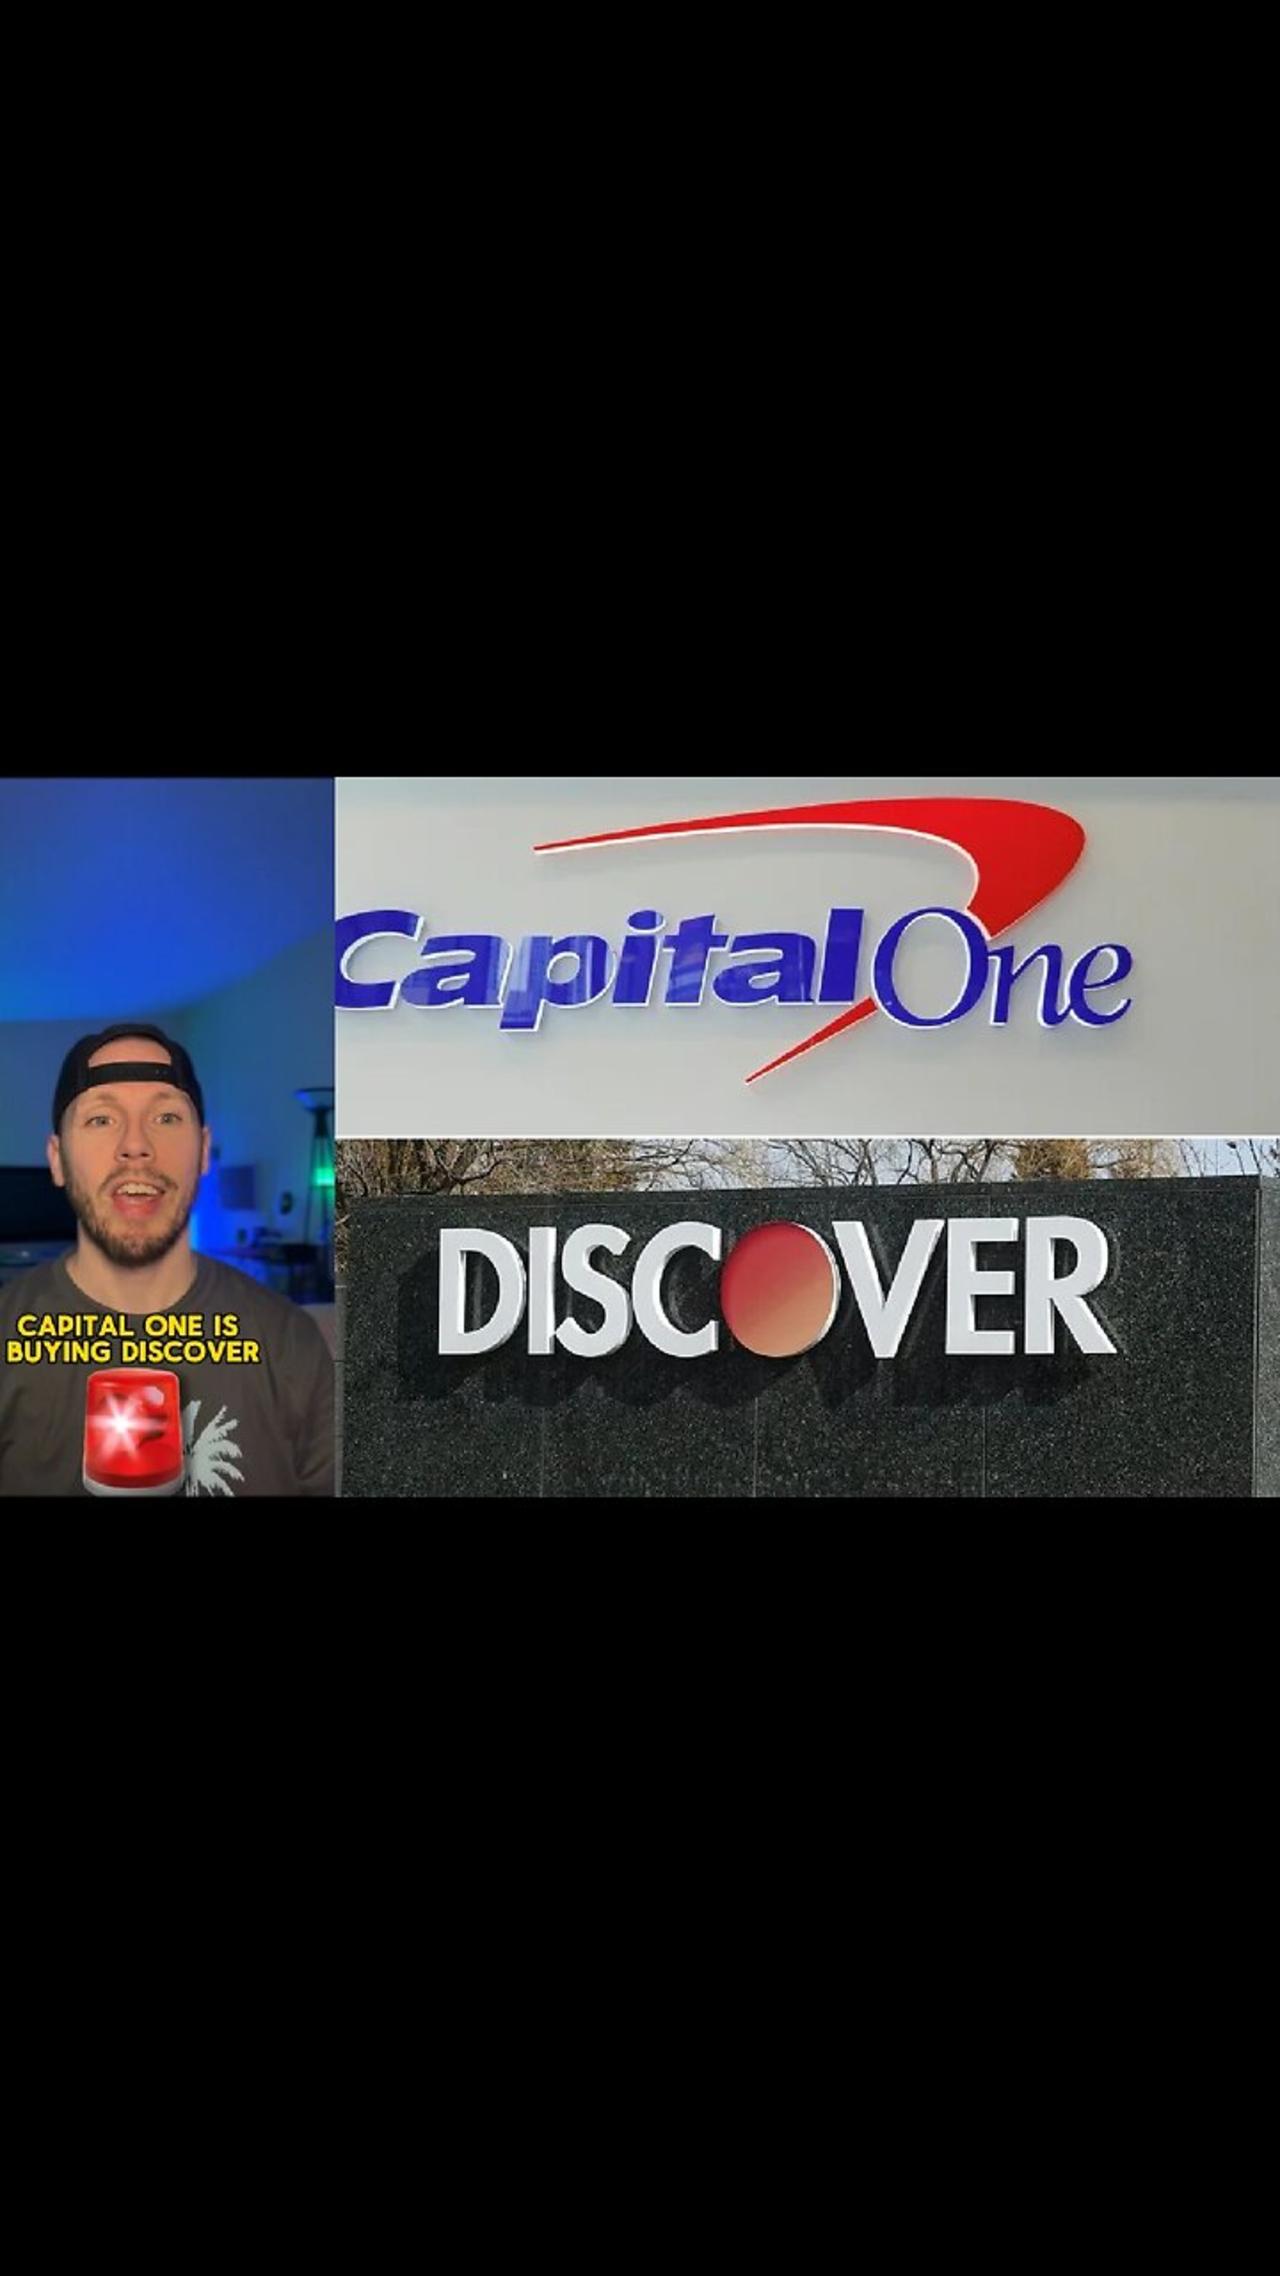 Capital One to Buy Discover